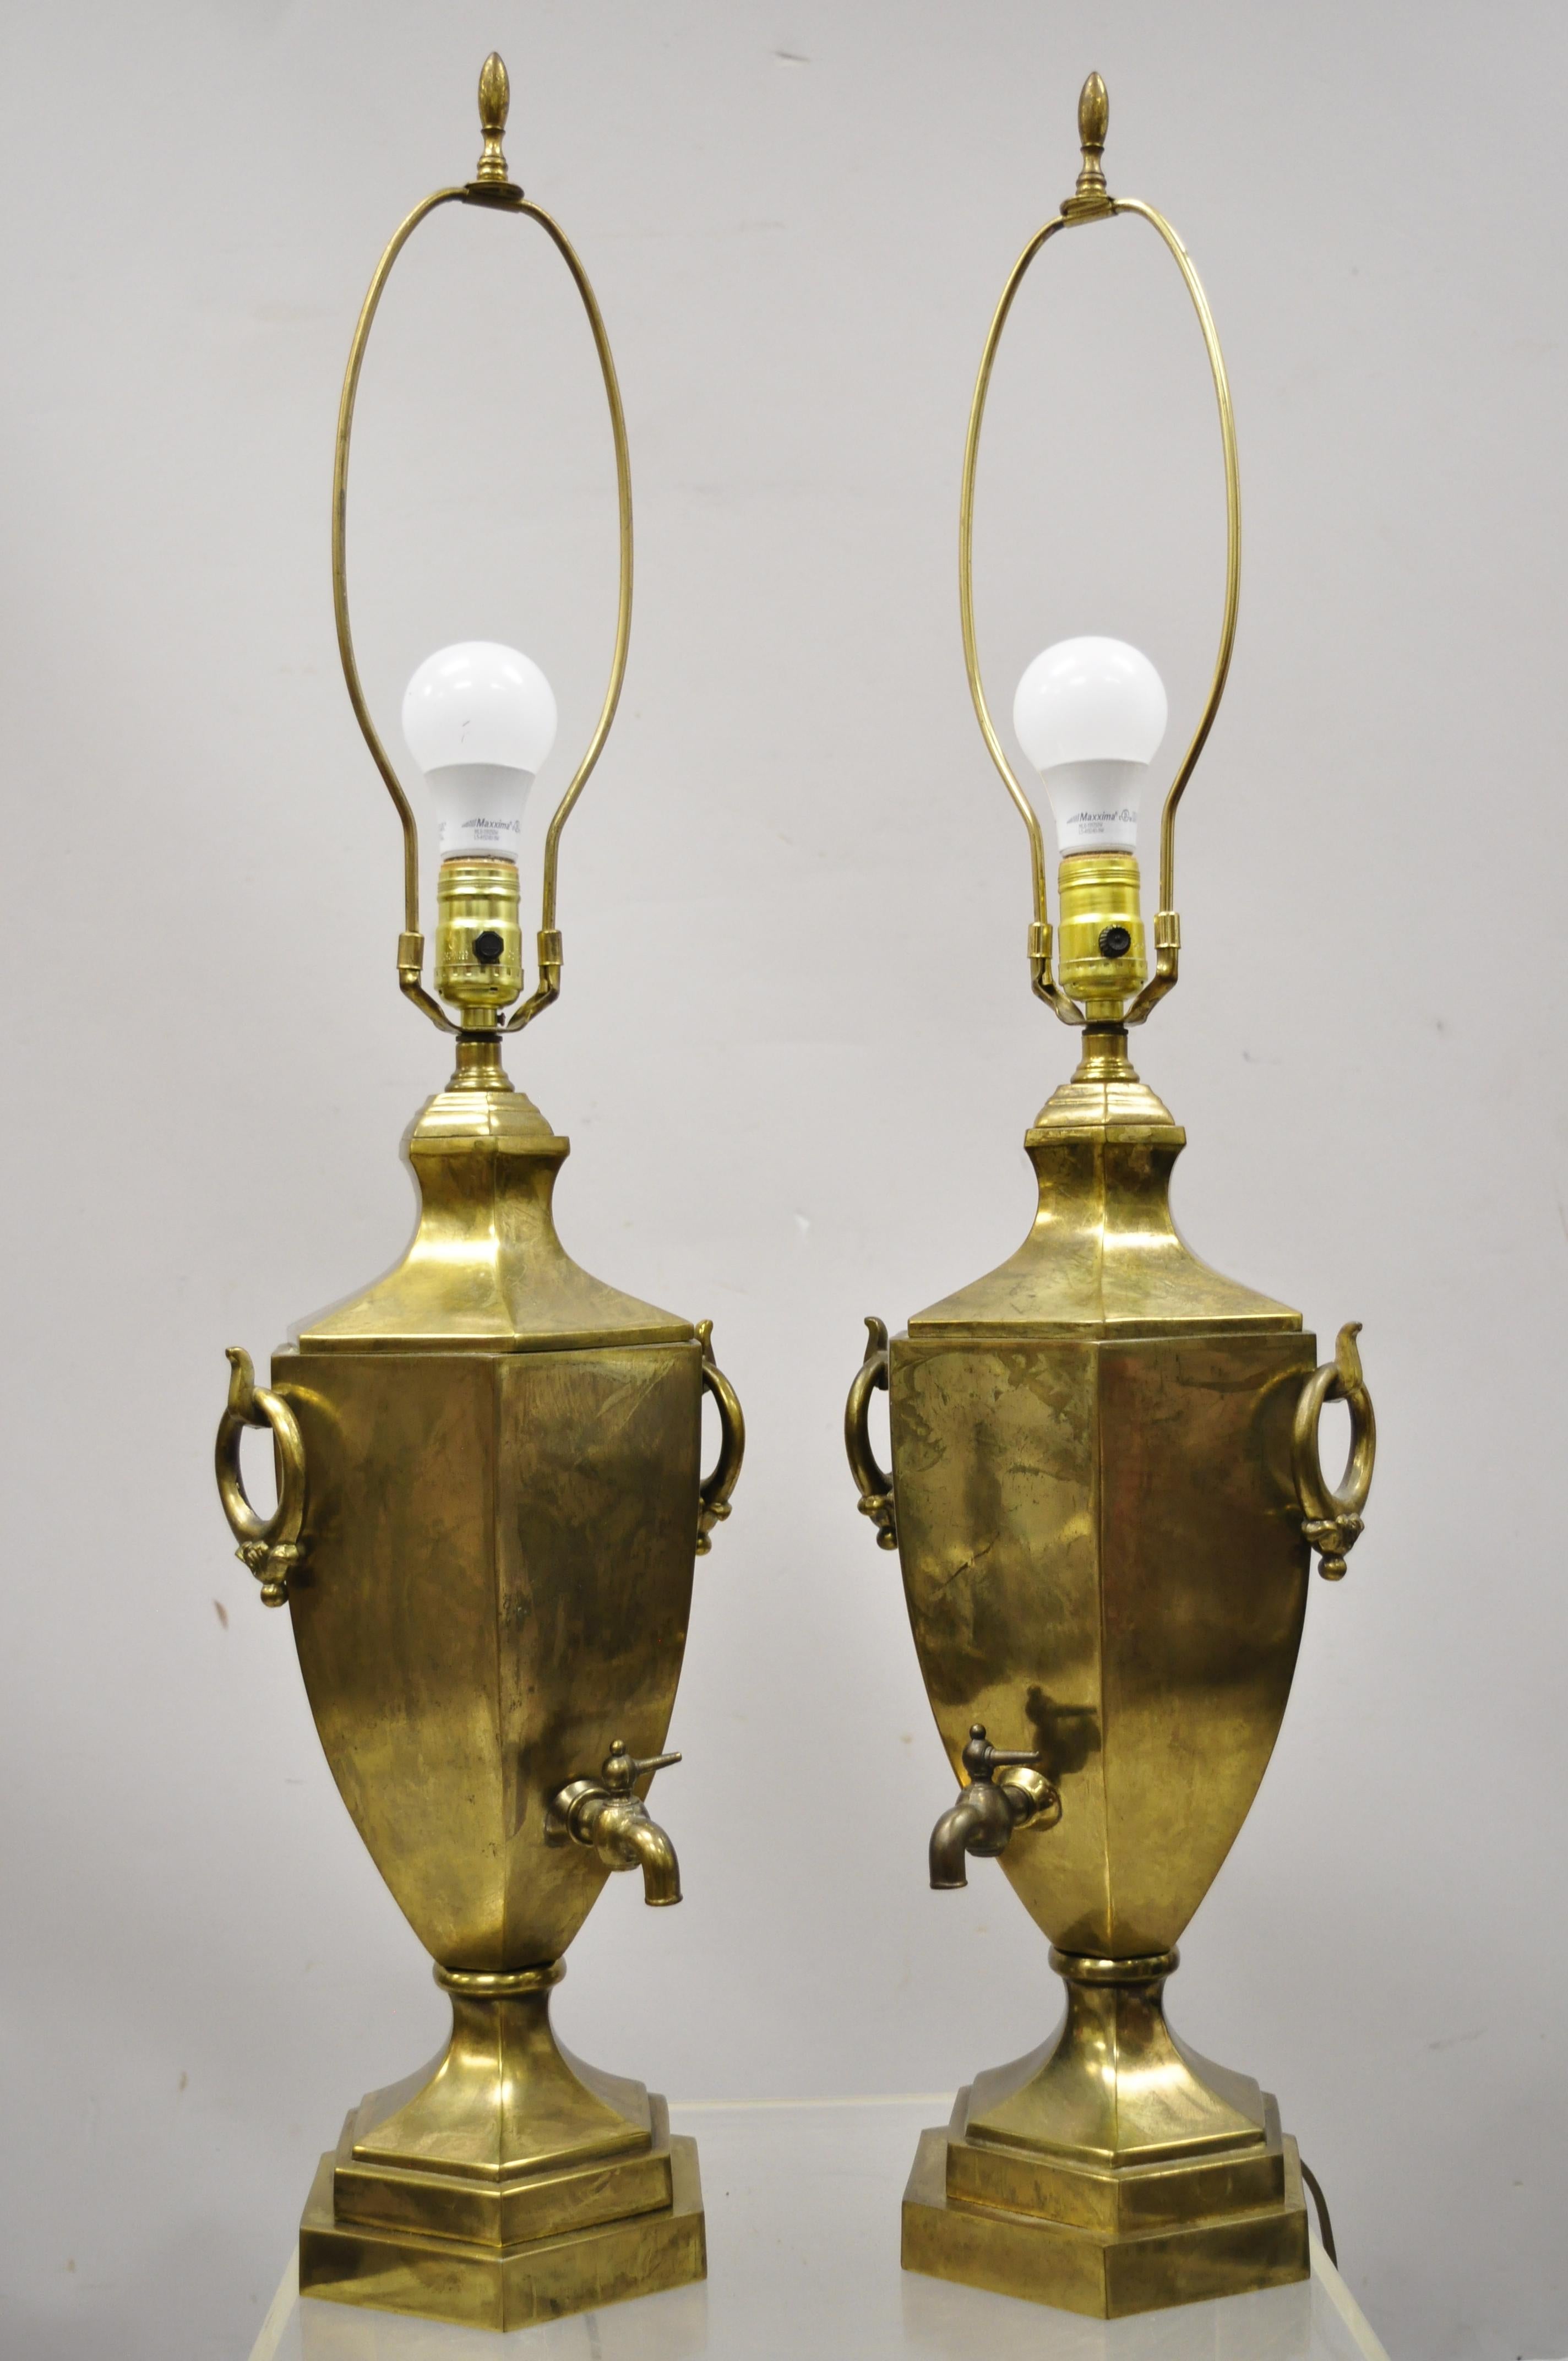 Paul Hanson Burnished Brass Samovar Urn Form Table Lamps with Shades - a Pair For Sale 2